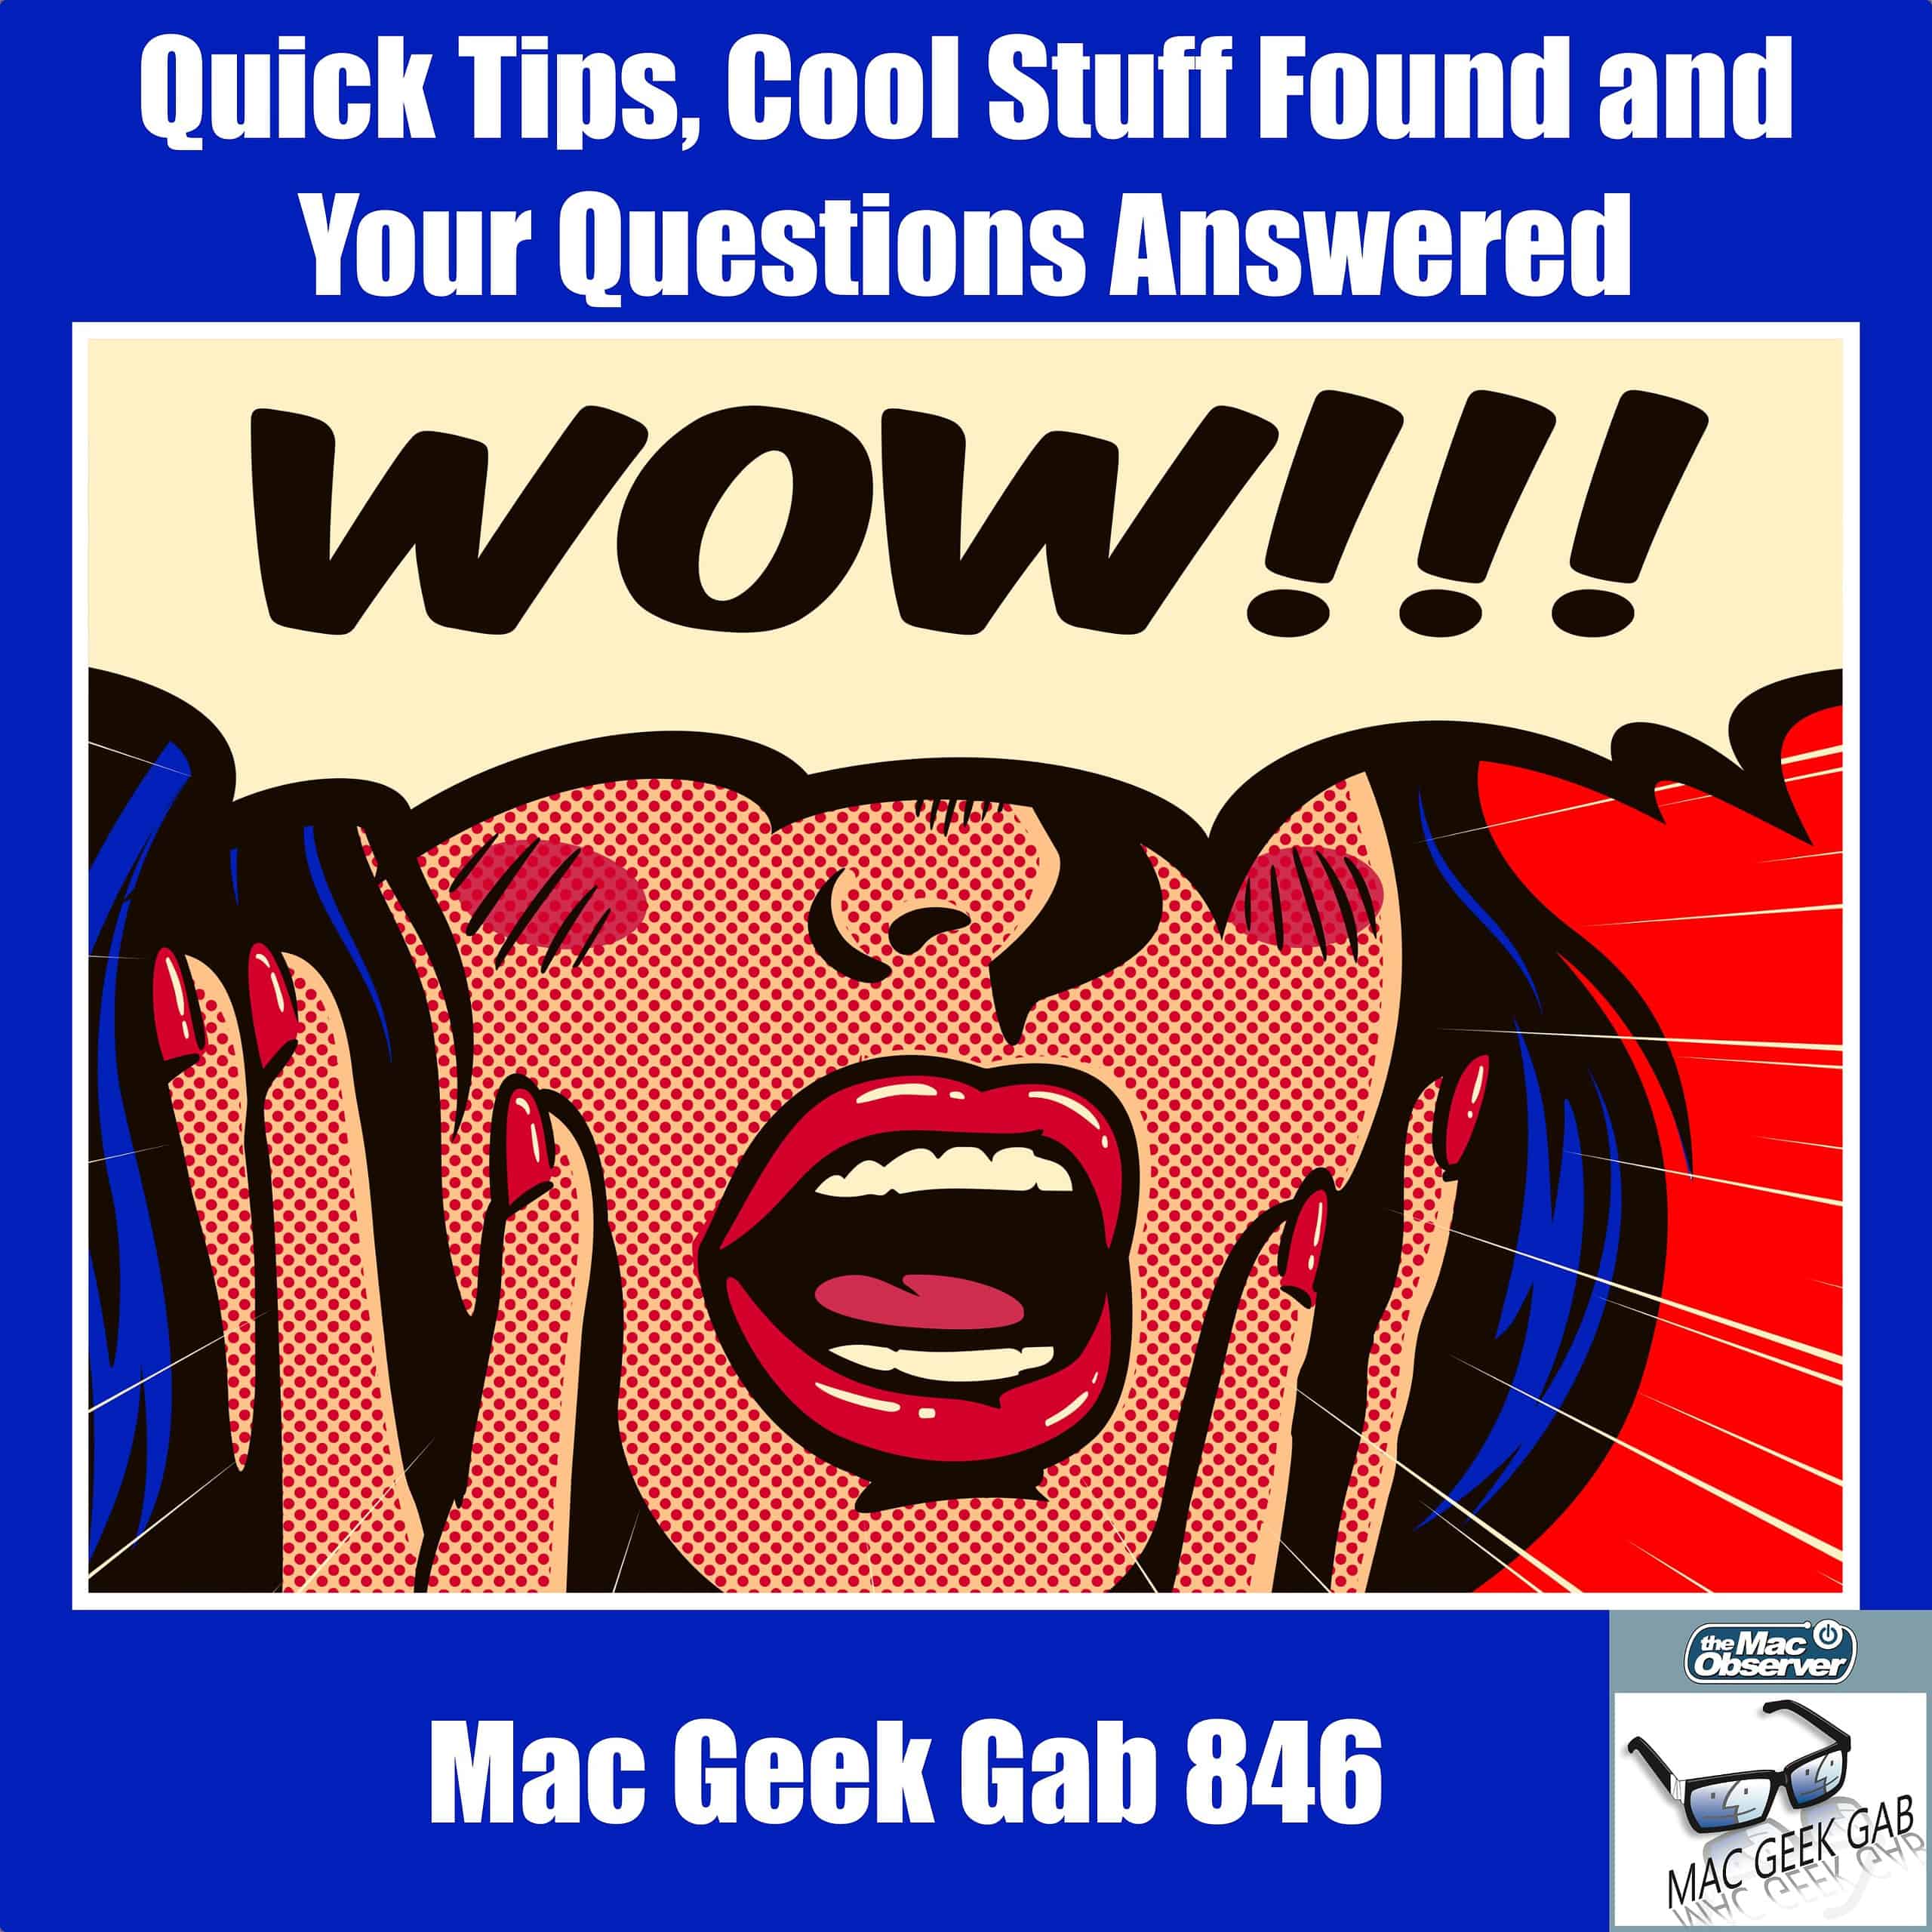 Quick Tips, Cool Stuff Found and Your Questions Answered: A Traditional MGG — Mac Geek Gab 846